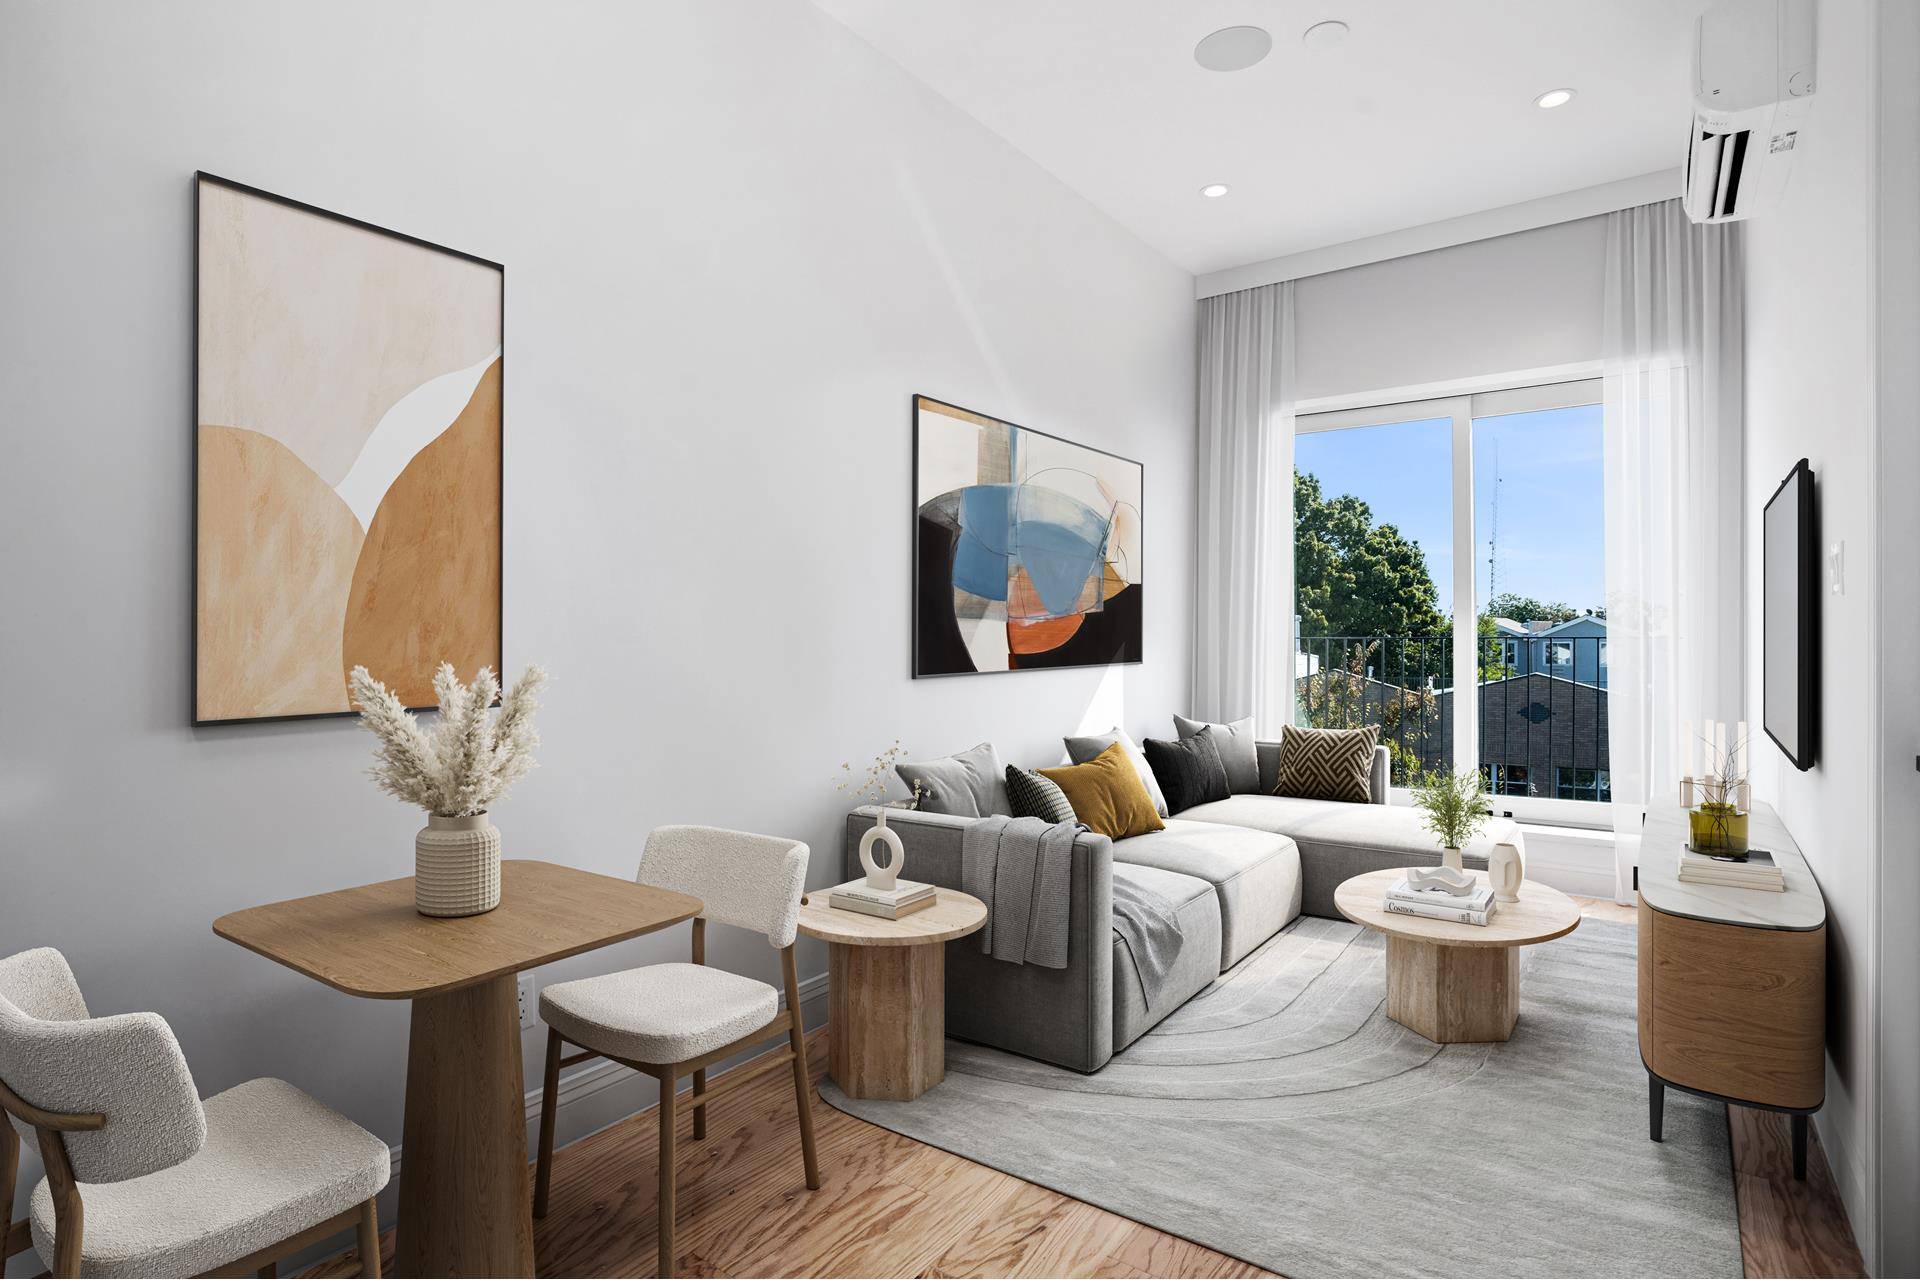 Introducing 37 Aberdeen Street, a new boutique condominium development featuring 6 pristine, modern apartments ranging from 1 2 bedrooms, located in the vibrant Bushwick neighborhood of Brooklyn !